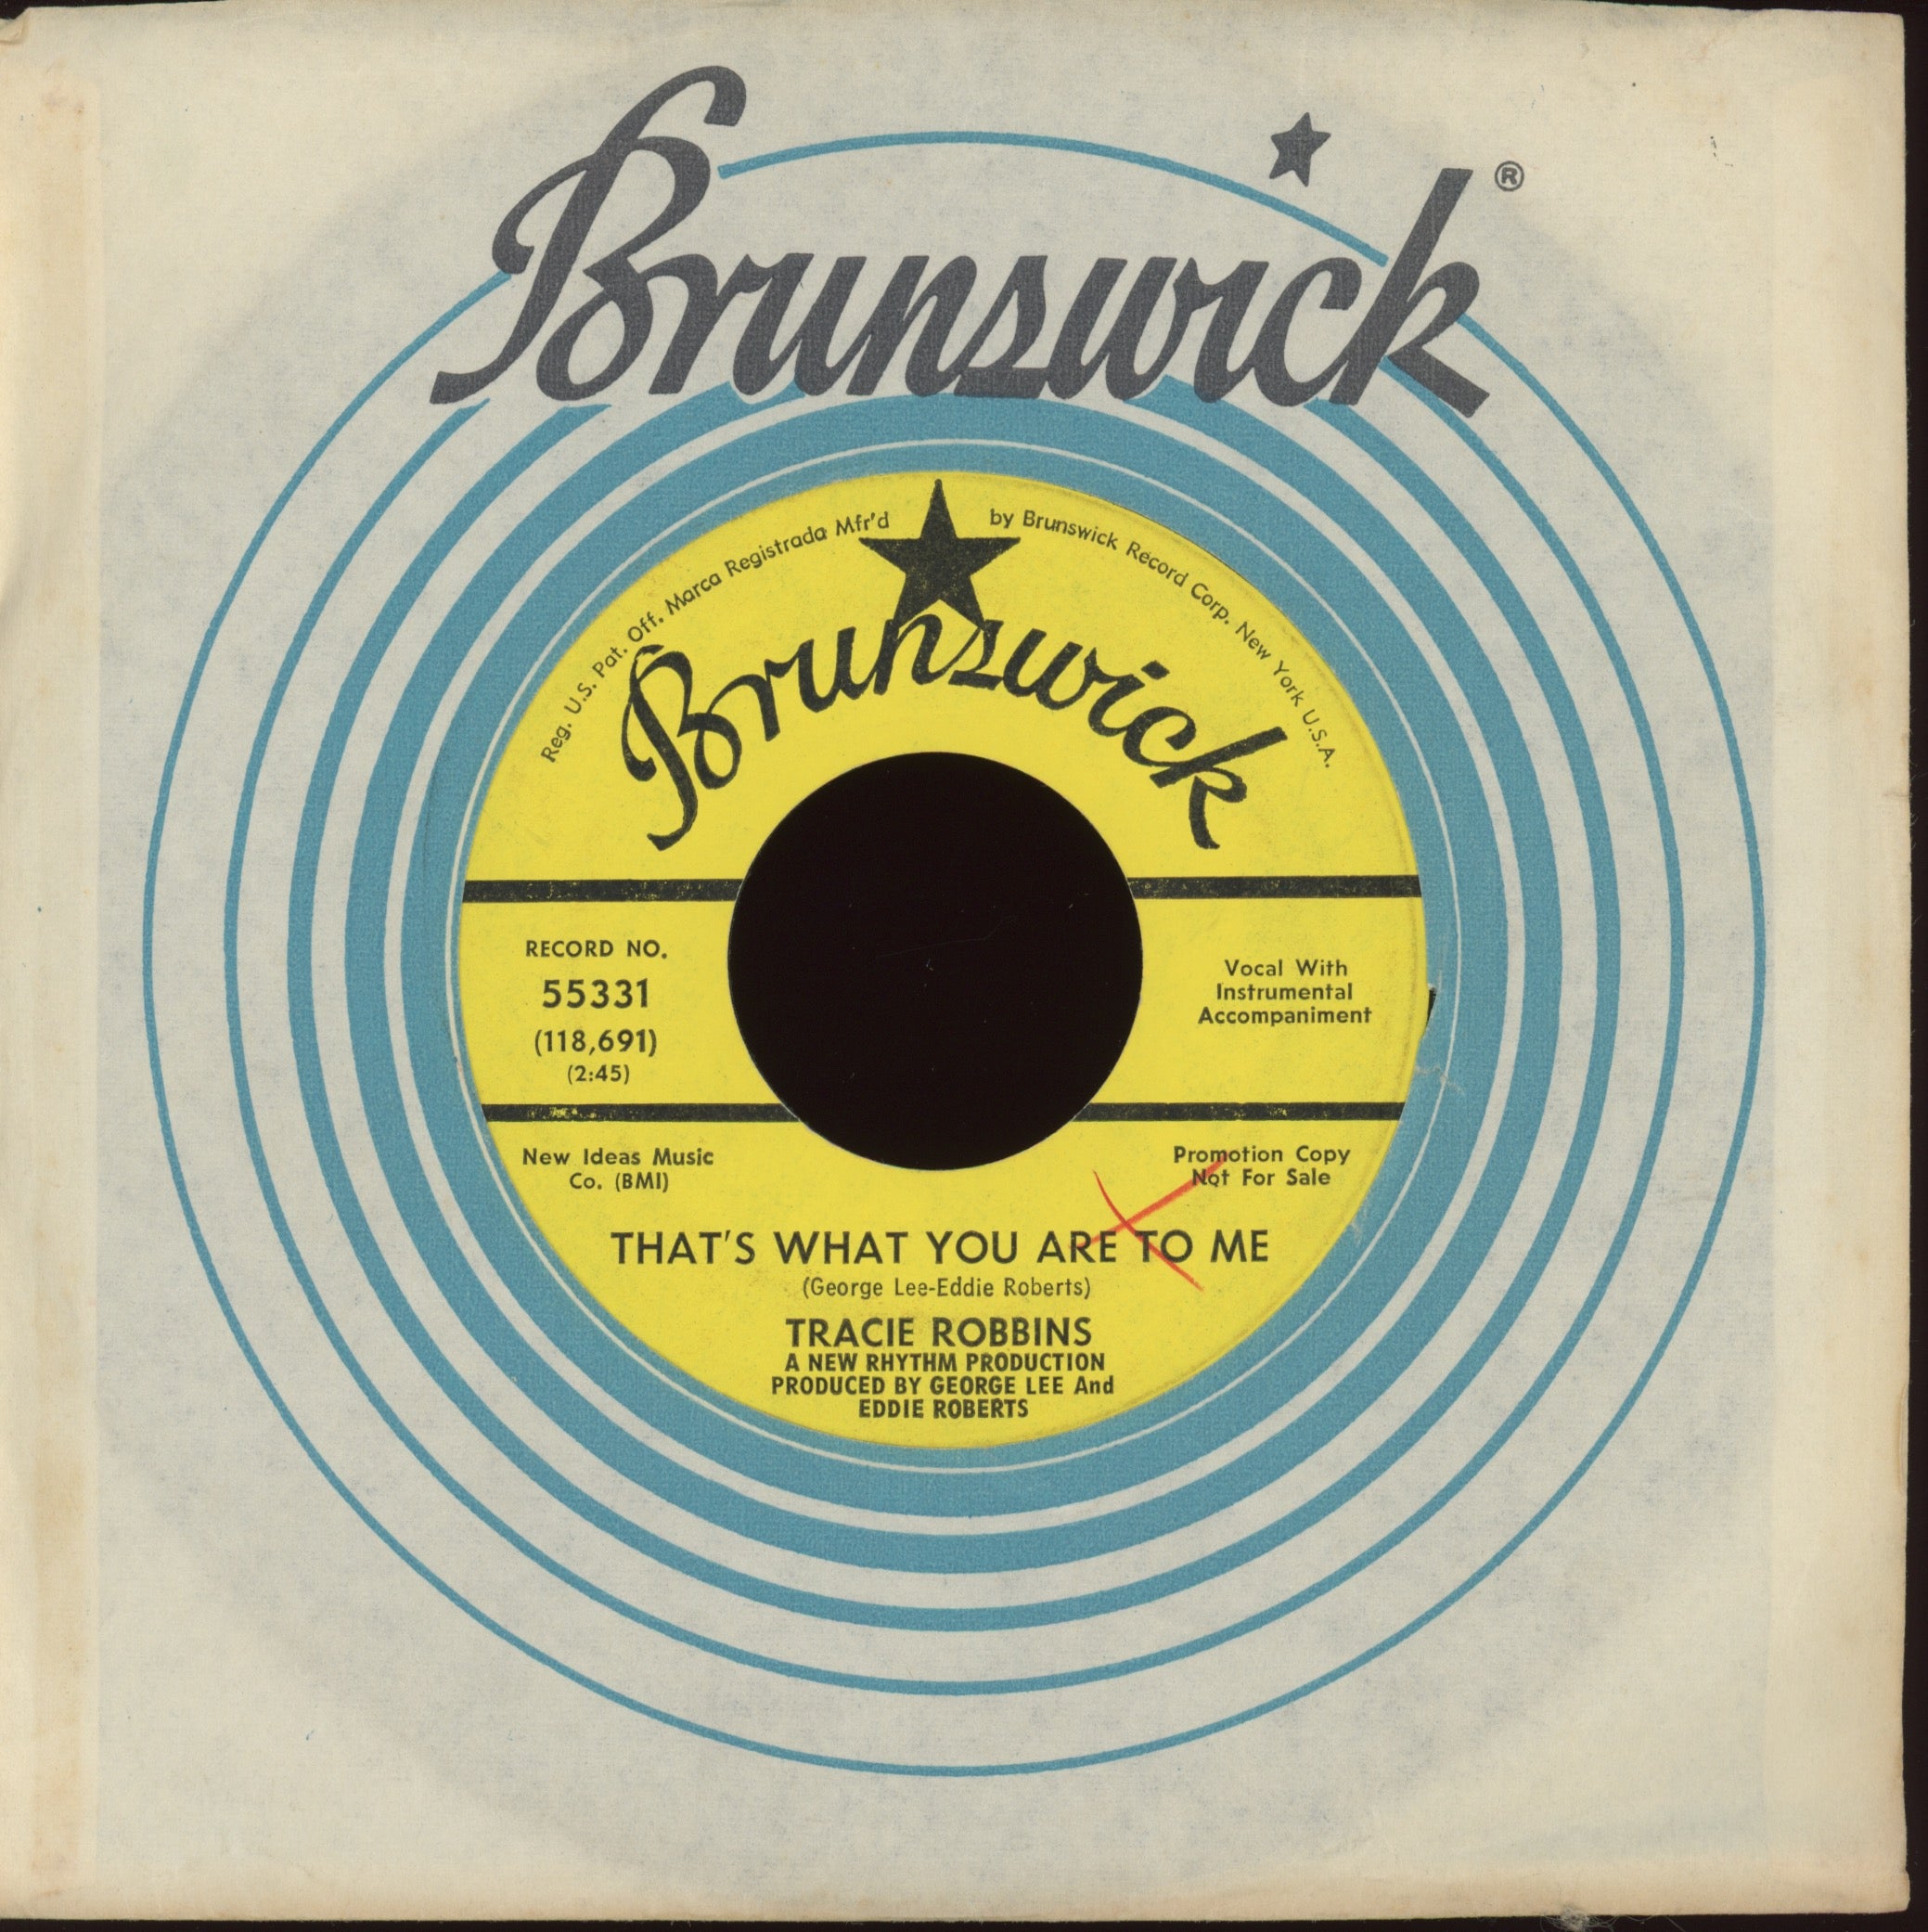 Tracie Robbins - This World Without You on Brunswick Promo Northern Soul 45